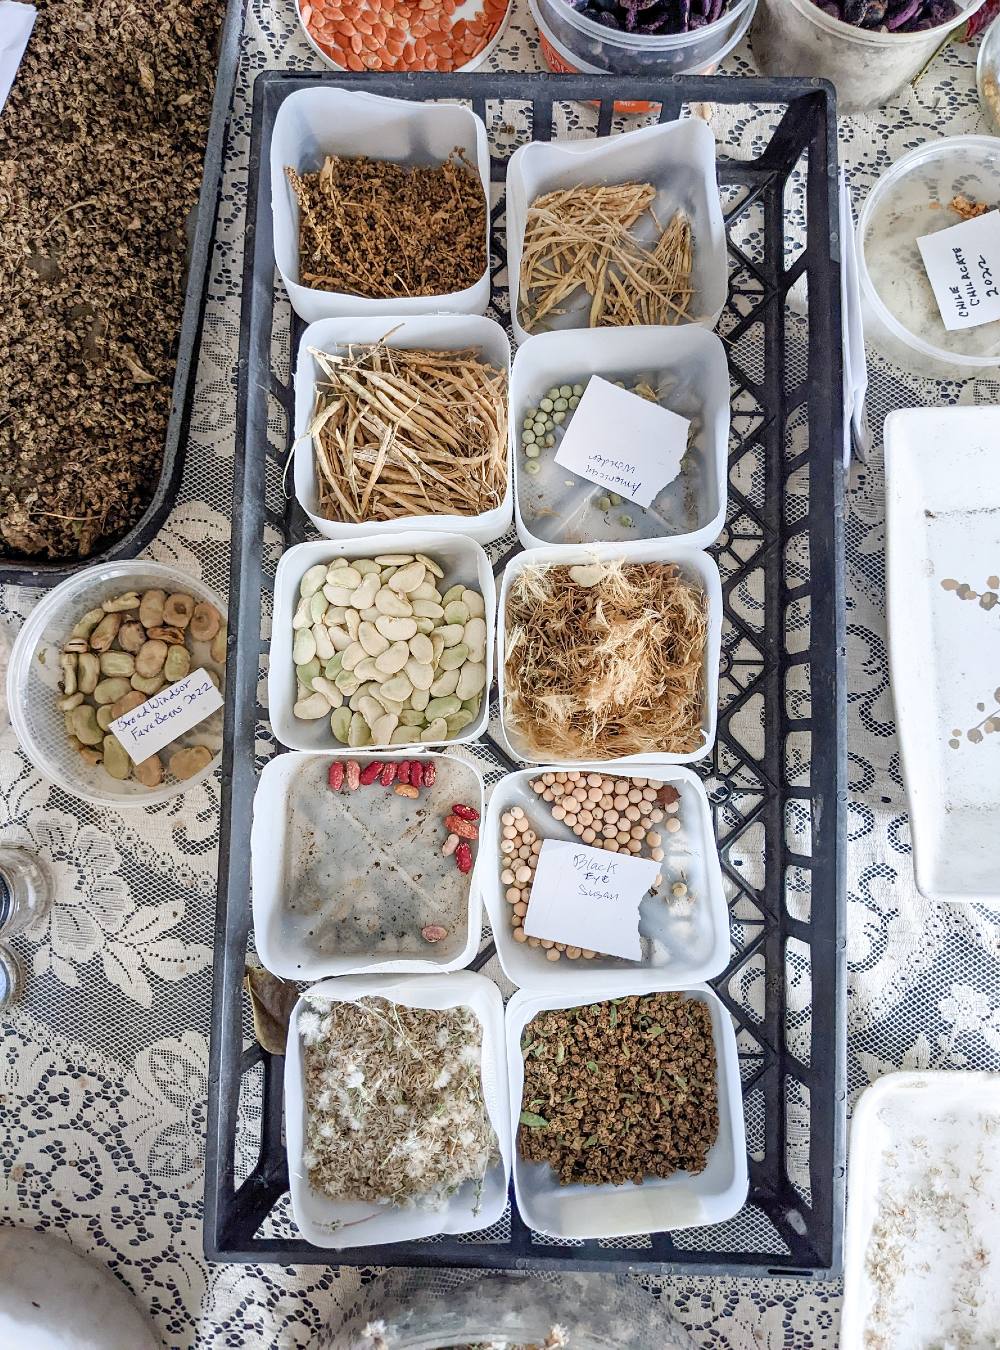 A tray of seeds on a dining table from above. They are in white square containers on a tabletop with a white lace tablecloth. The seeds include black eyed peas, American wonder peas, broad Windsor fava beans and more.